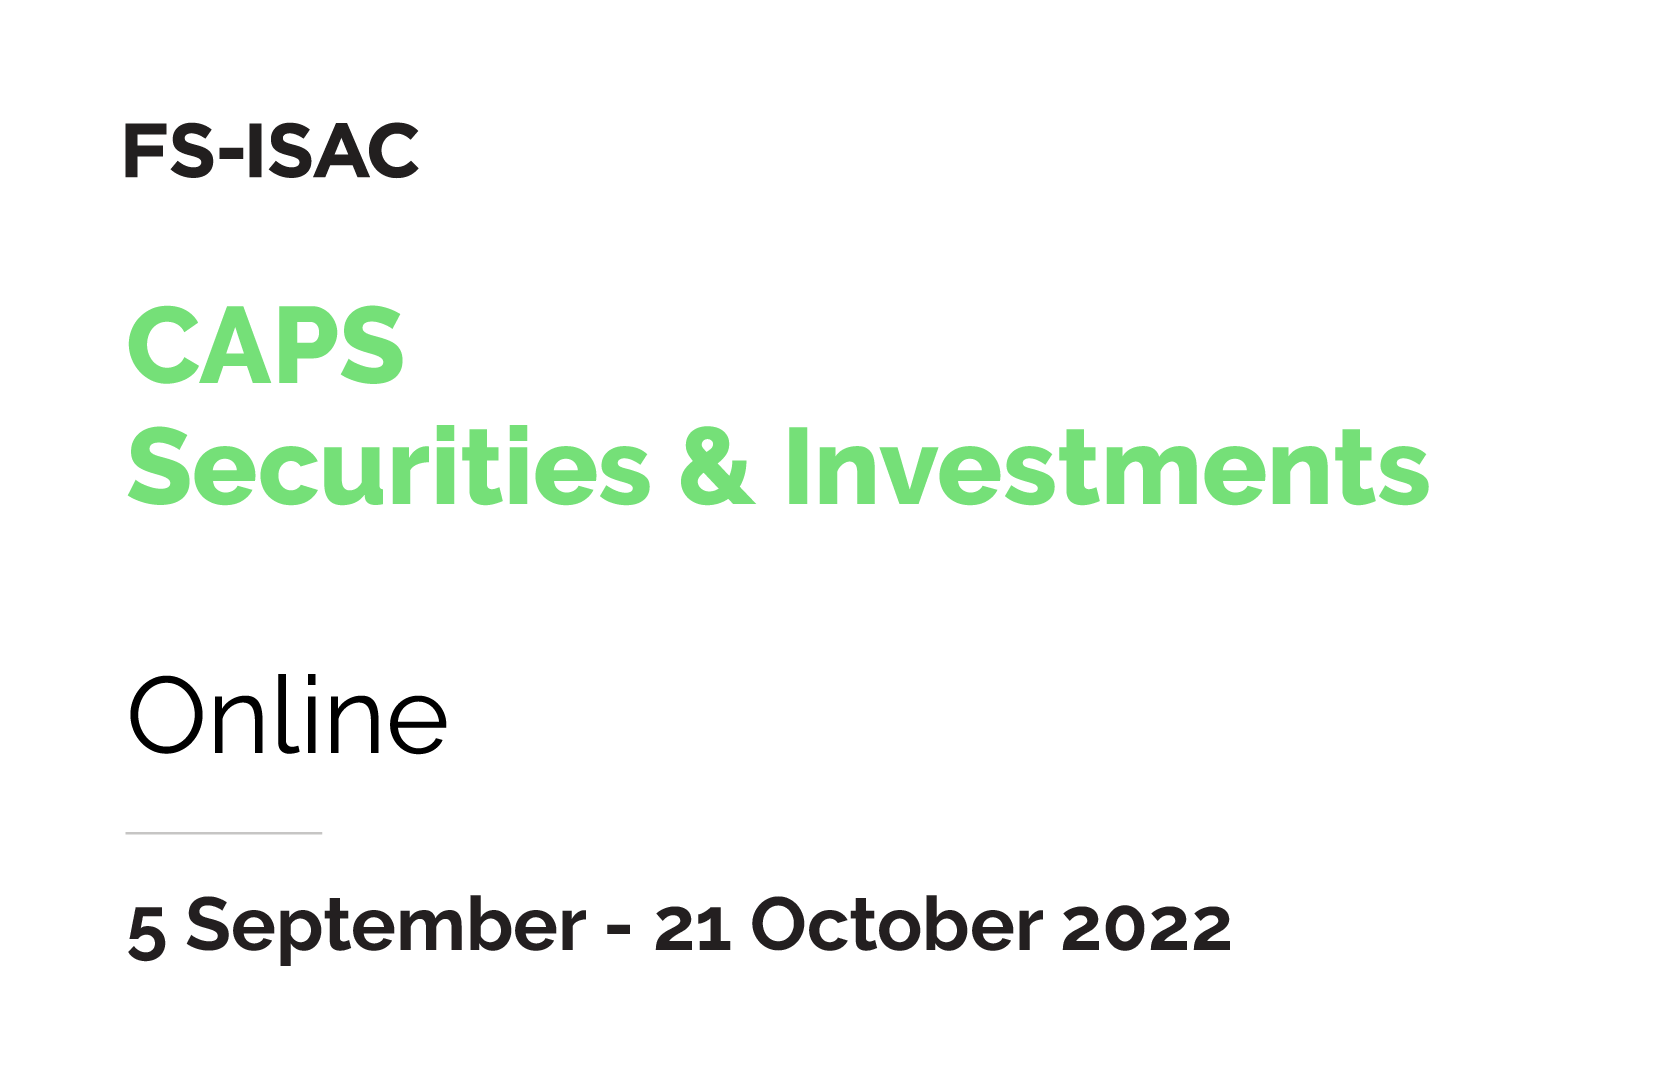 CAPS | Securities & Investments 2022